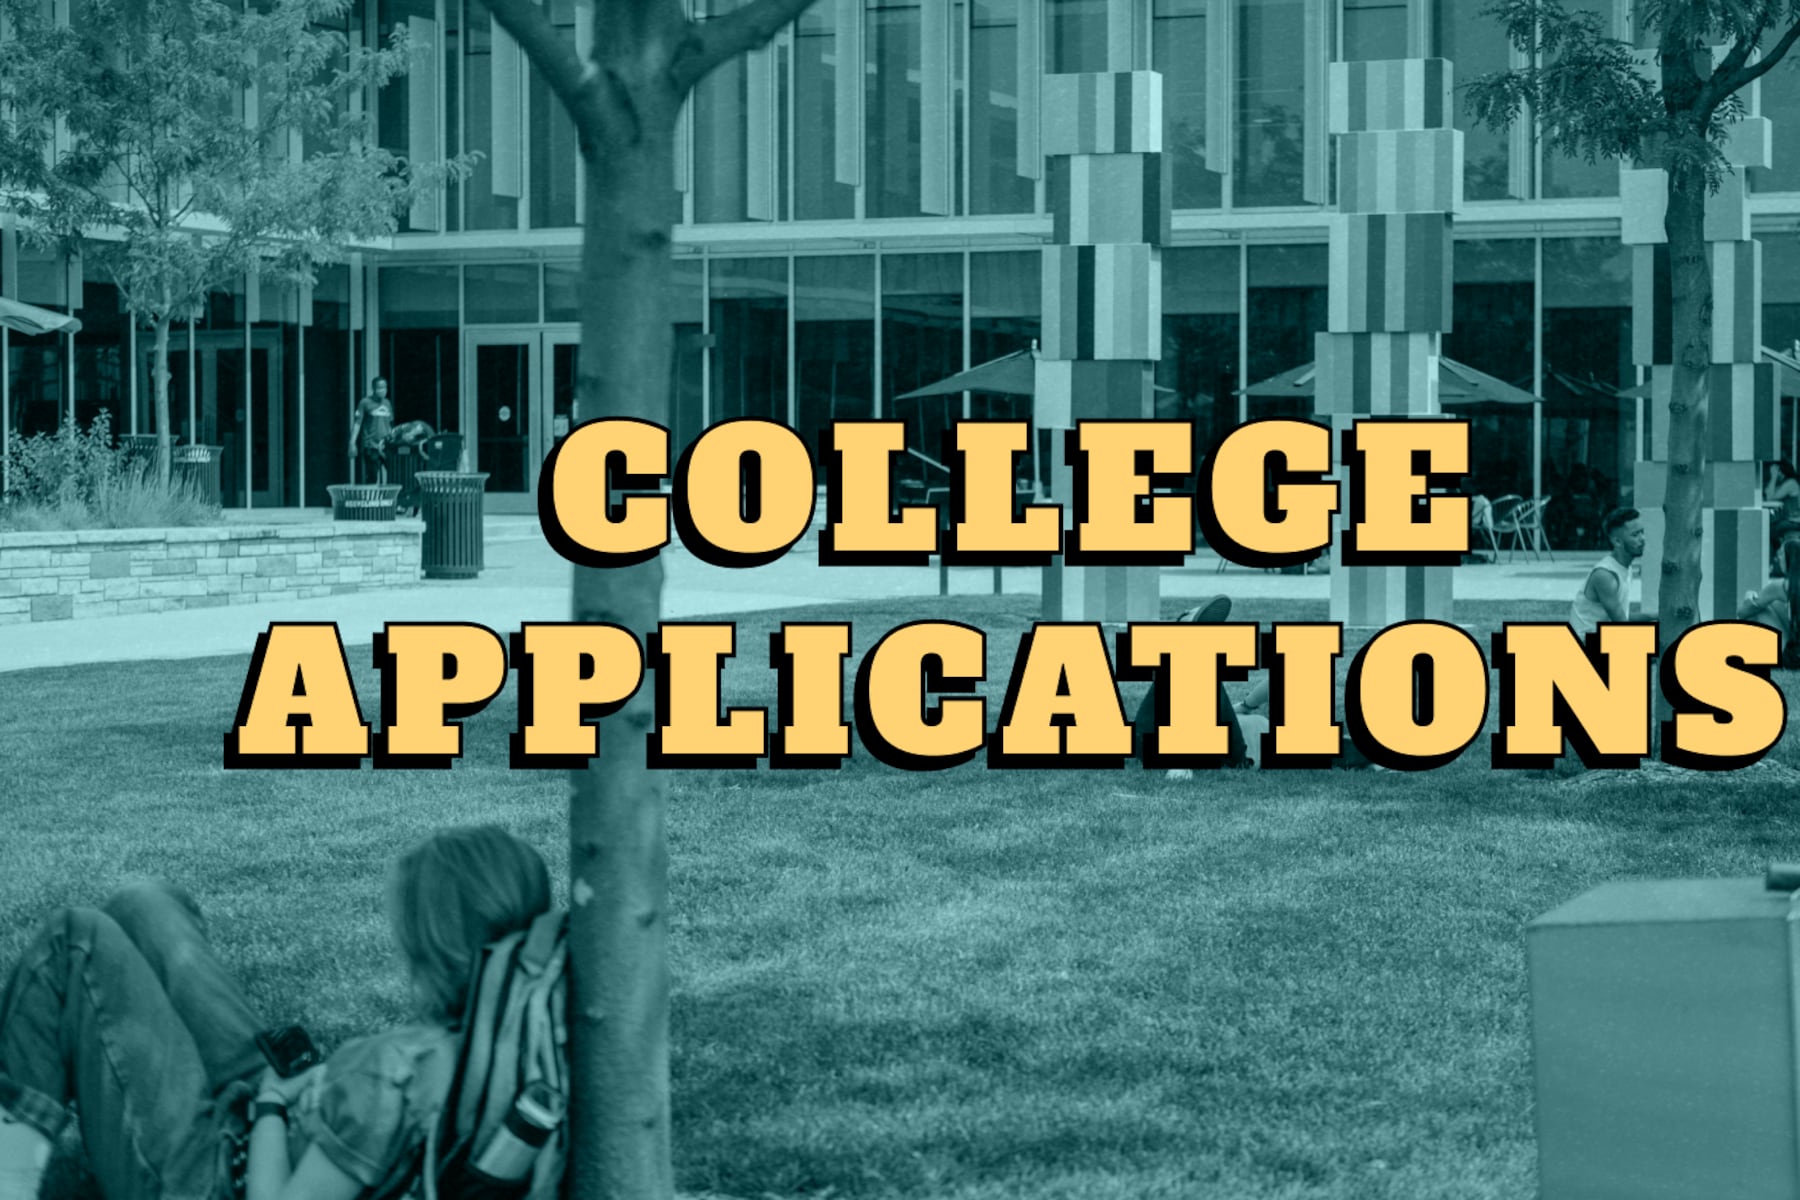 Image of a college campus with the text: “College Applications”